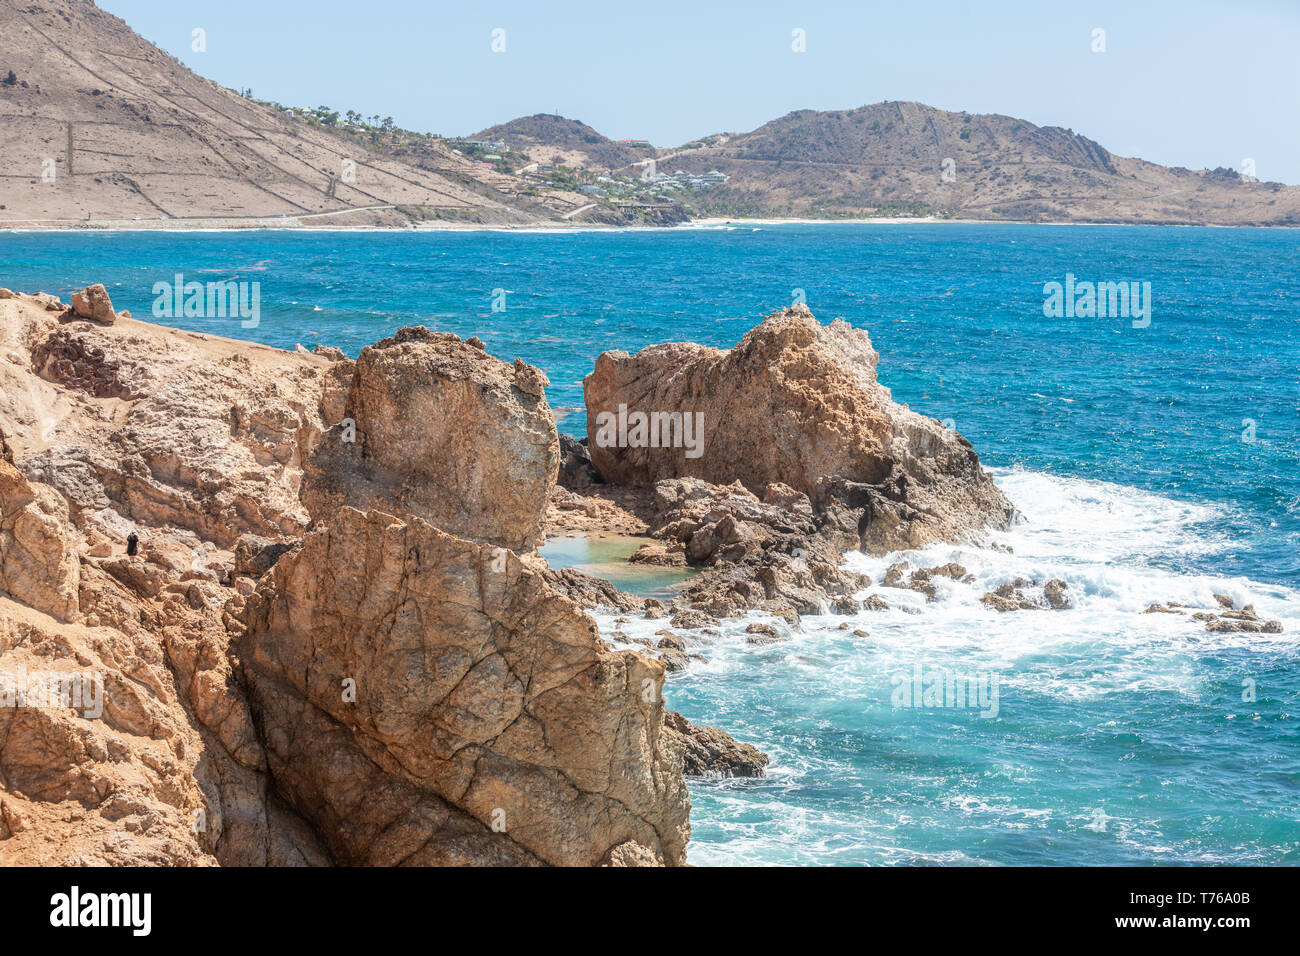 The rocky shore line of Grand Fond, St Barts Stock Photo